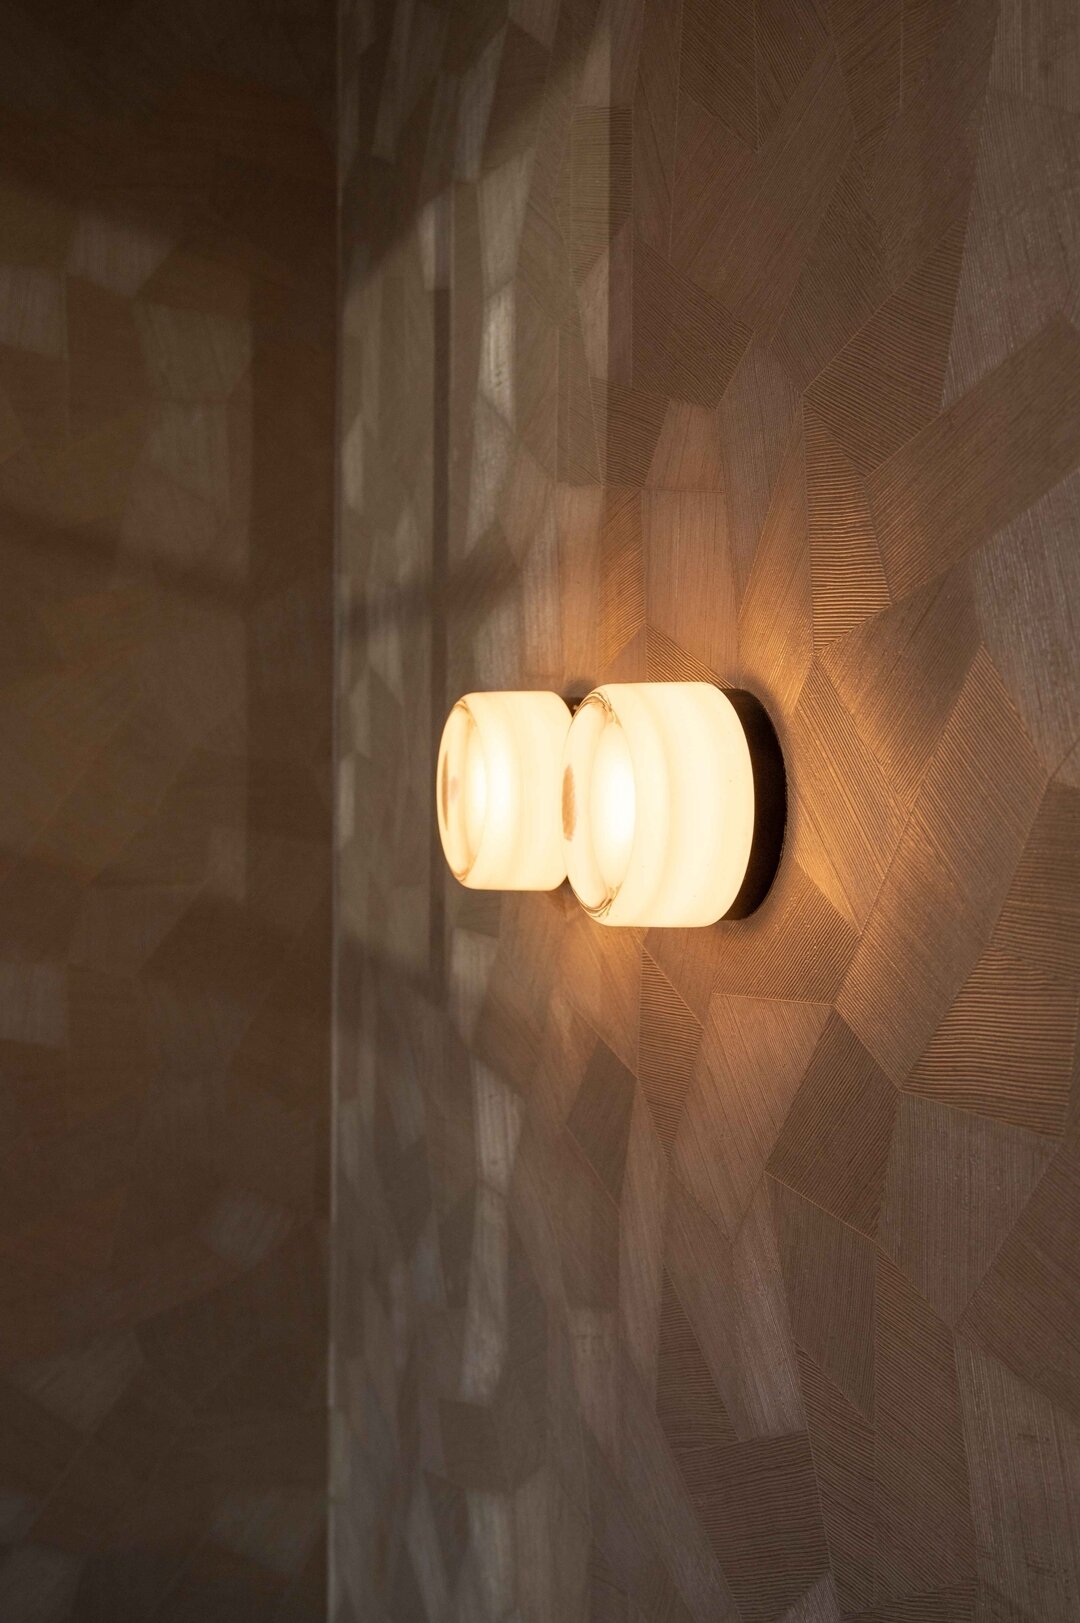 MV Interior Design // elevating each detail with a nice wallpaper and lighting combination.